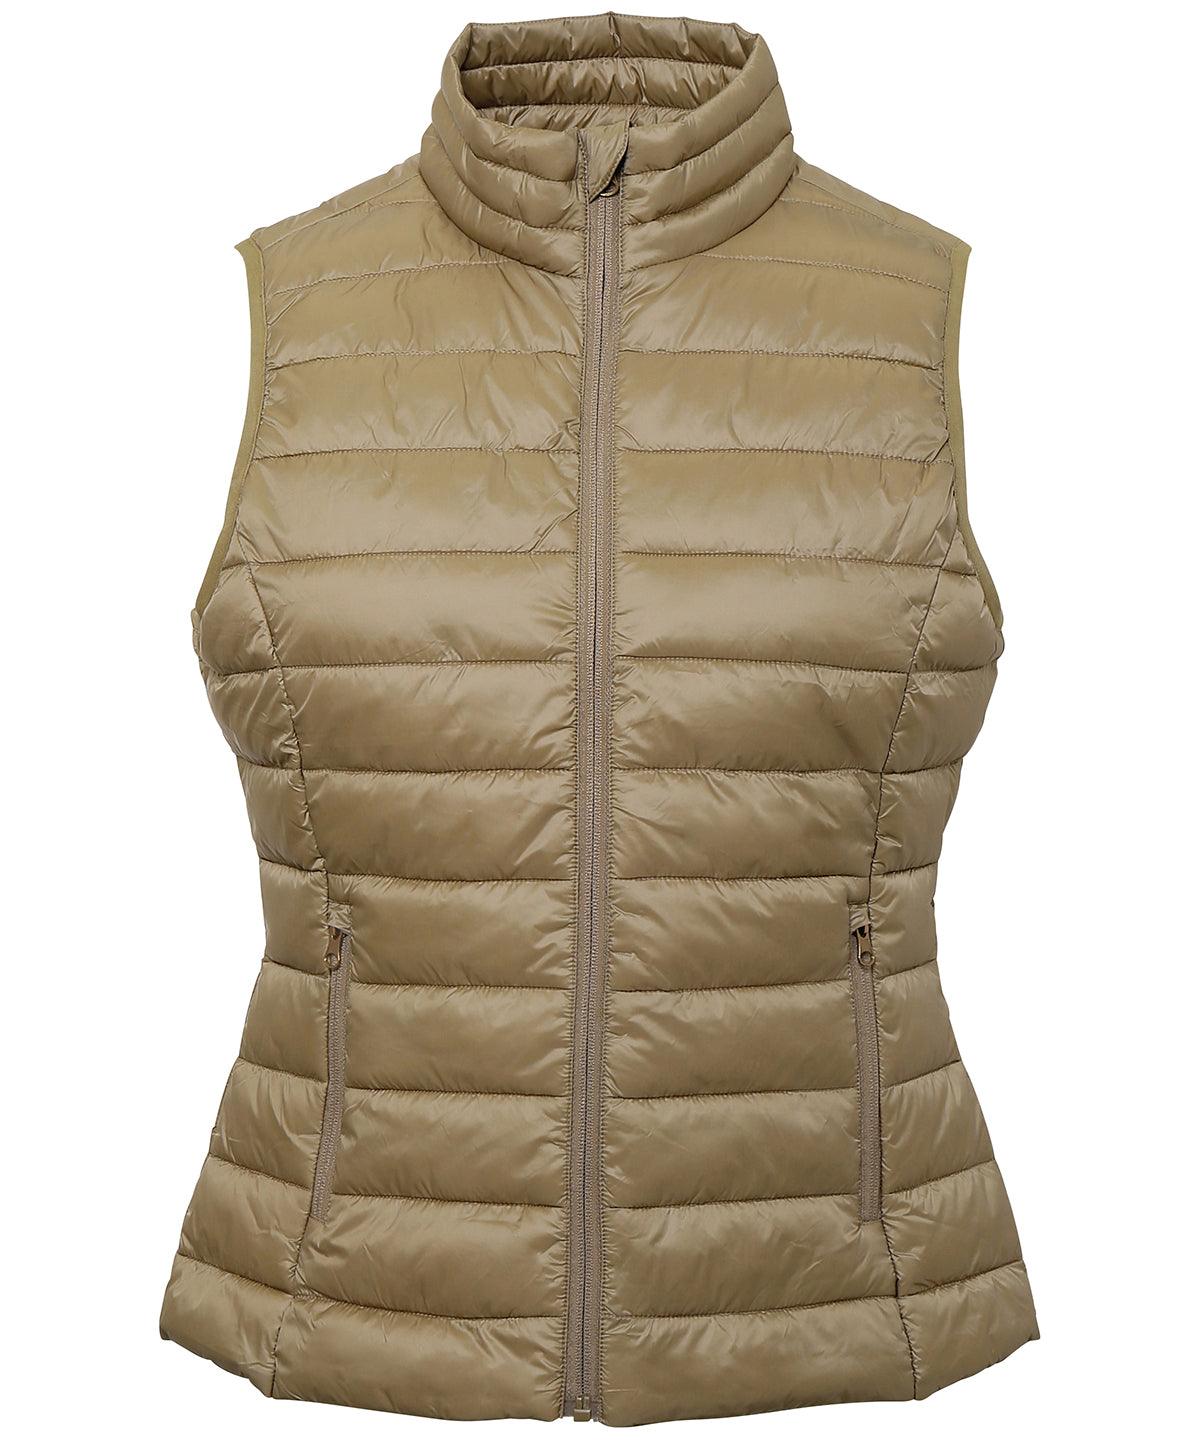 Khaki - Women's terrain padded gilet Body Warmers 2786 Alfresco Dining, Gilets and Bodywarmers, Jackets & Coats, Must Haves, Outdoor Dining, Padded & Insulation, Women's Fashion Schoolwear Centres